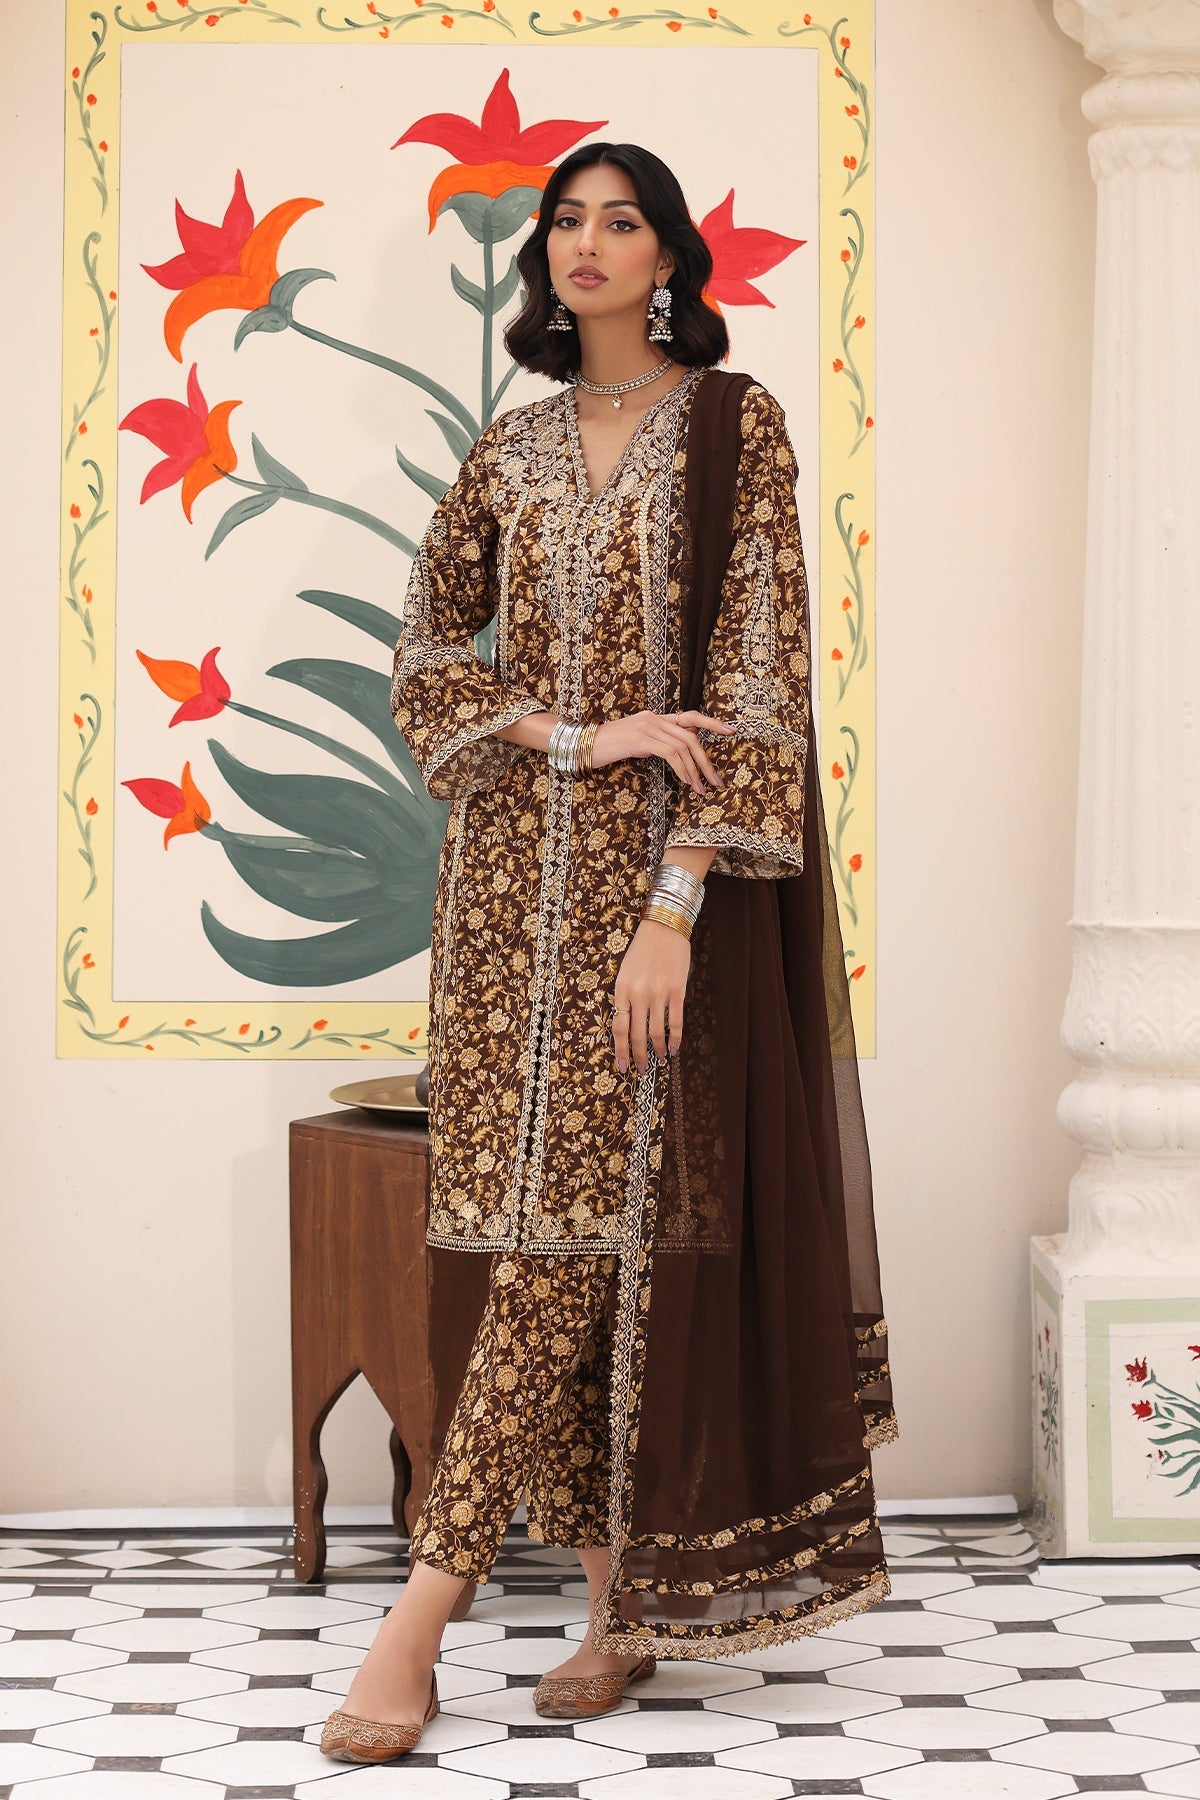 3-PC Embroidered Cotton Shirt with Chiffon Dupatta and Trouser CNP-4-03